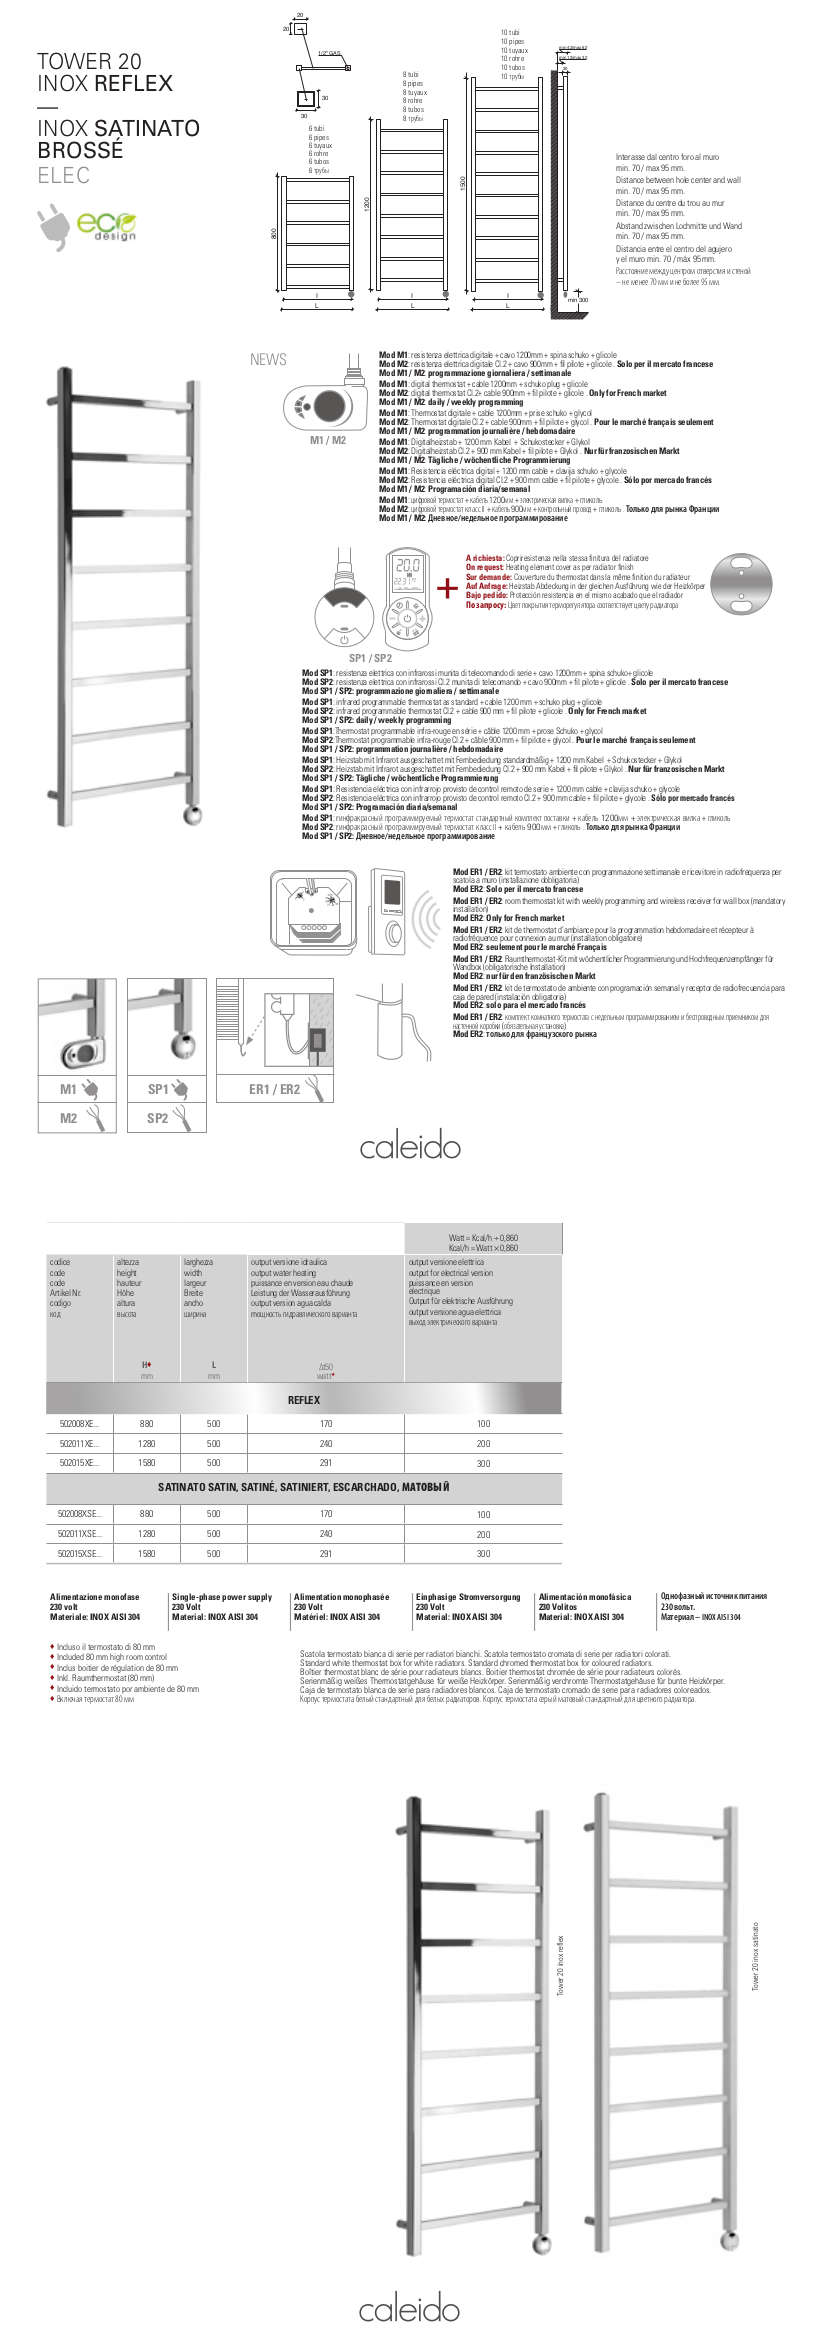 technical details towel warmer tower 20 electric satin stainless steel caleido